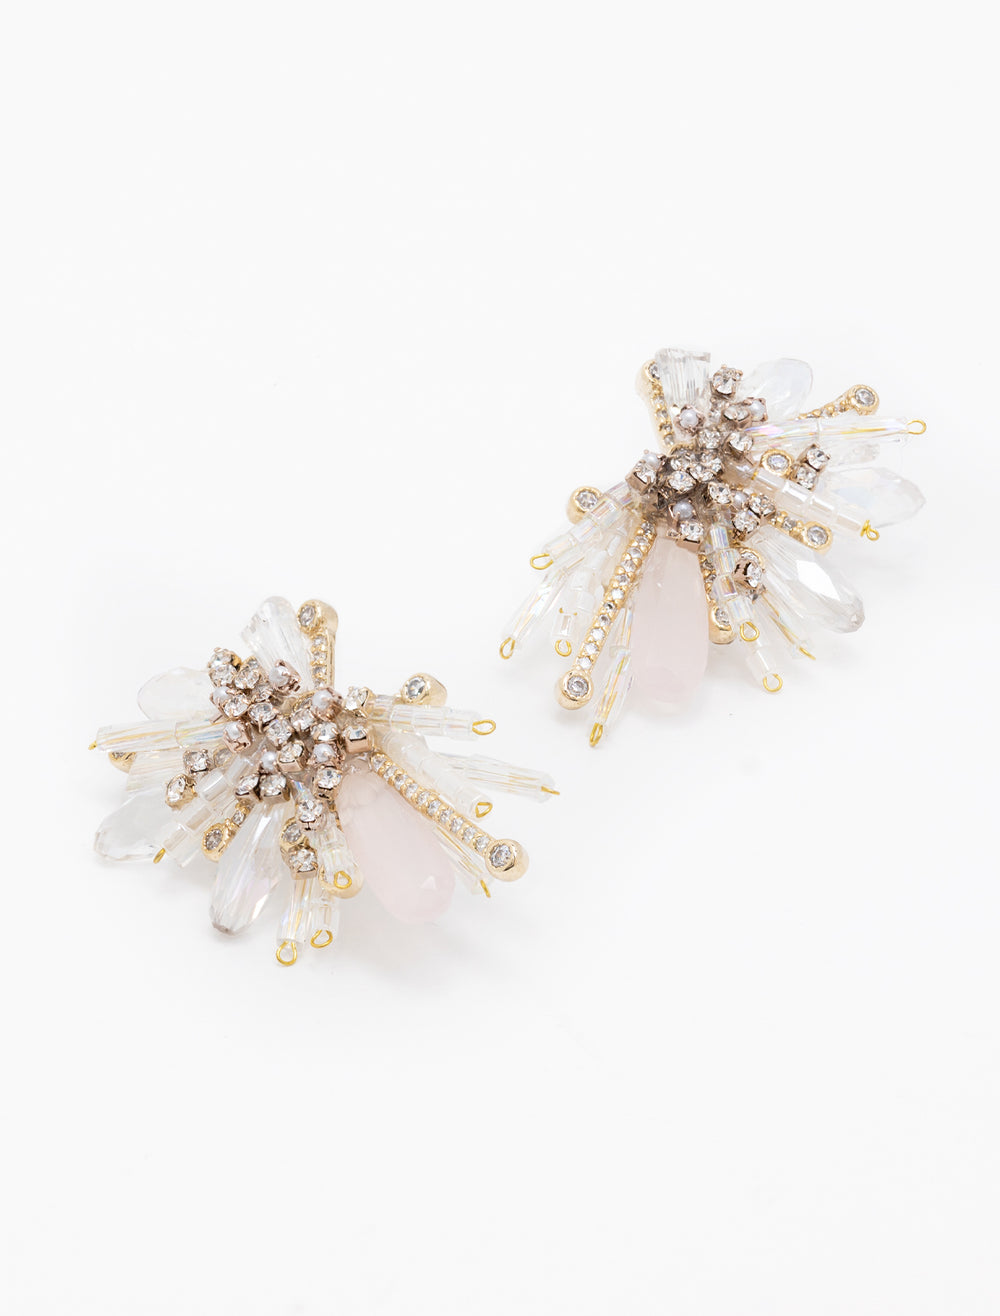 Close-up view of Tai's Beads and Crystal Spray Earrings.